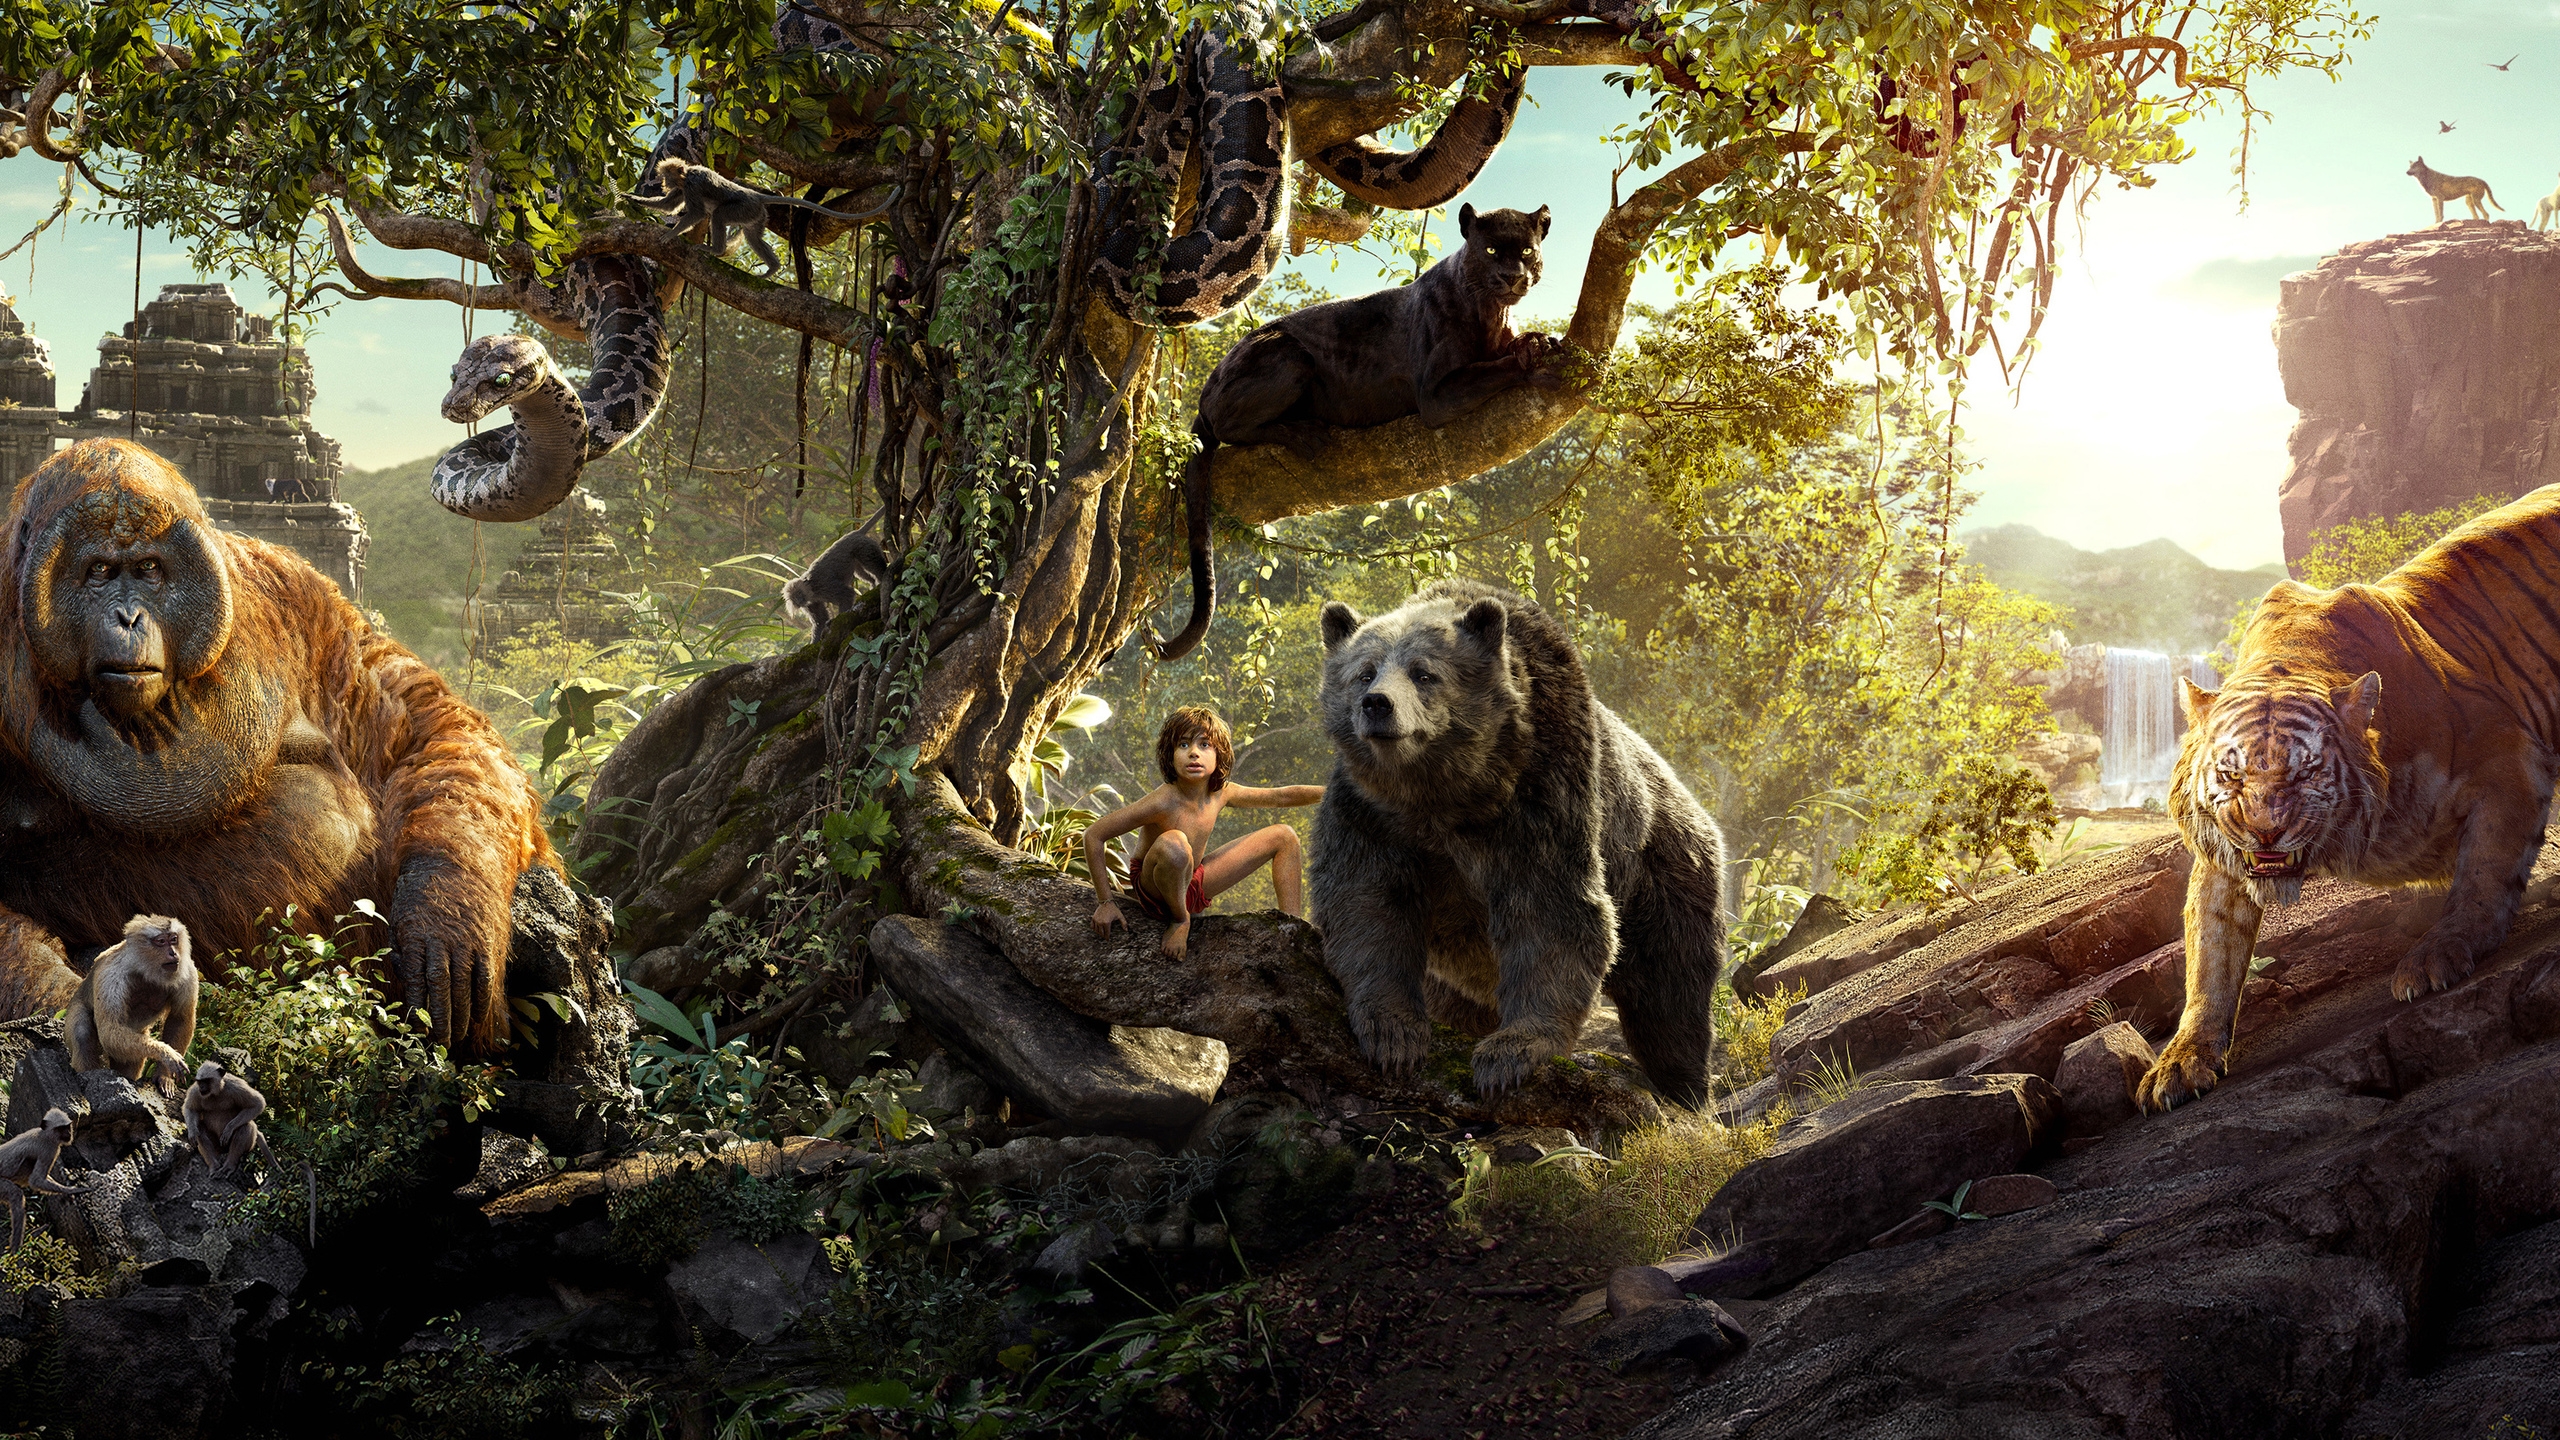 The Jungle Book 2016 Movie for 2560x1440 HDTV resolution